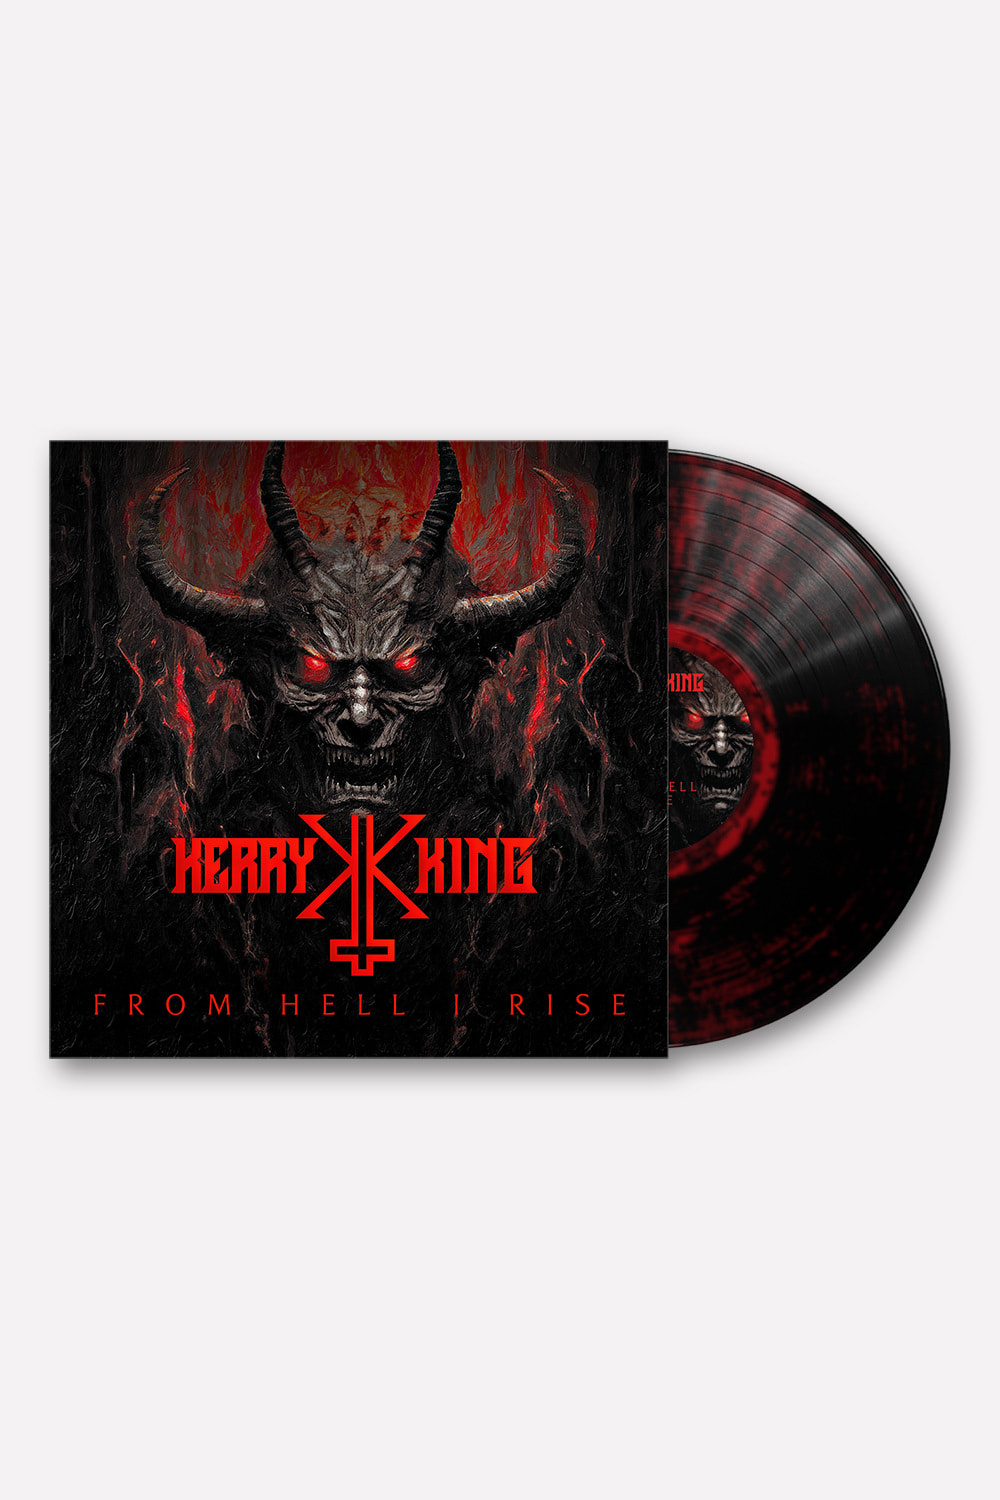 Kerry King - From Hell I Rise. BLACK/DARK RED MARBLED VINYL 